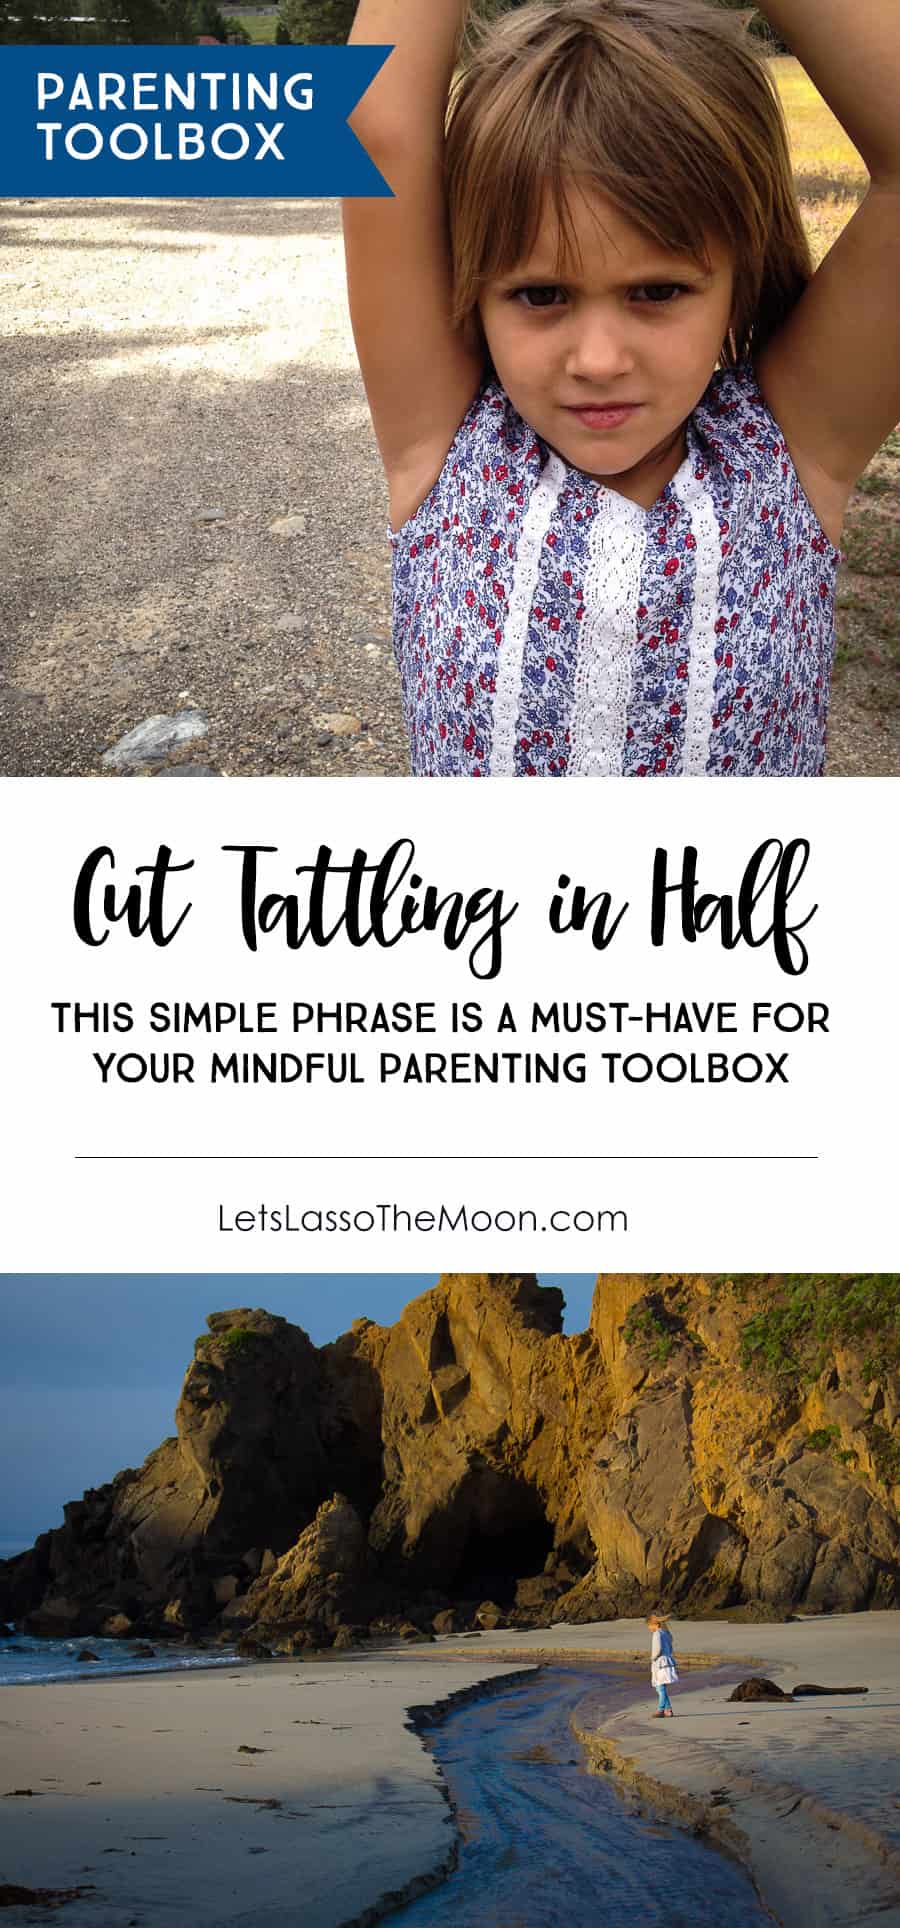 Cut Tattle Telling in Half: This simple phrase is a must-have for your mindful parenting tool box *If you have issues with sibling kindness too, you've got to read this. I can't tell you how many times I've already used this phrase with my daughter (and myself!) since I've read this article.